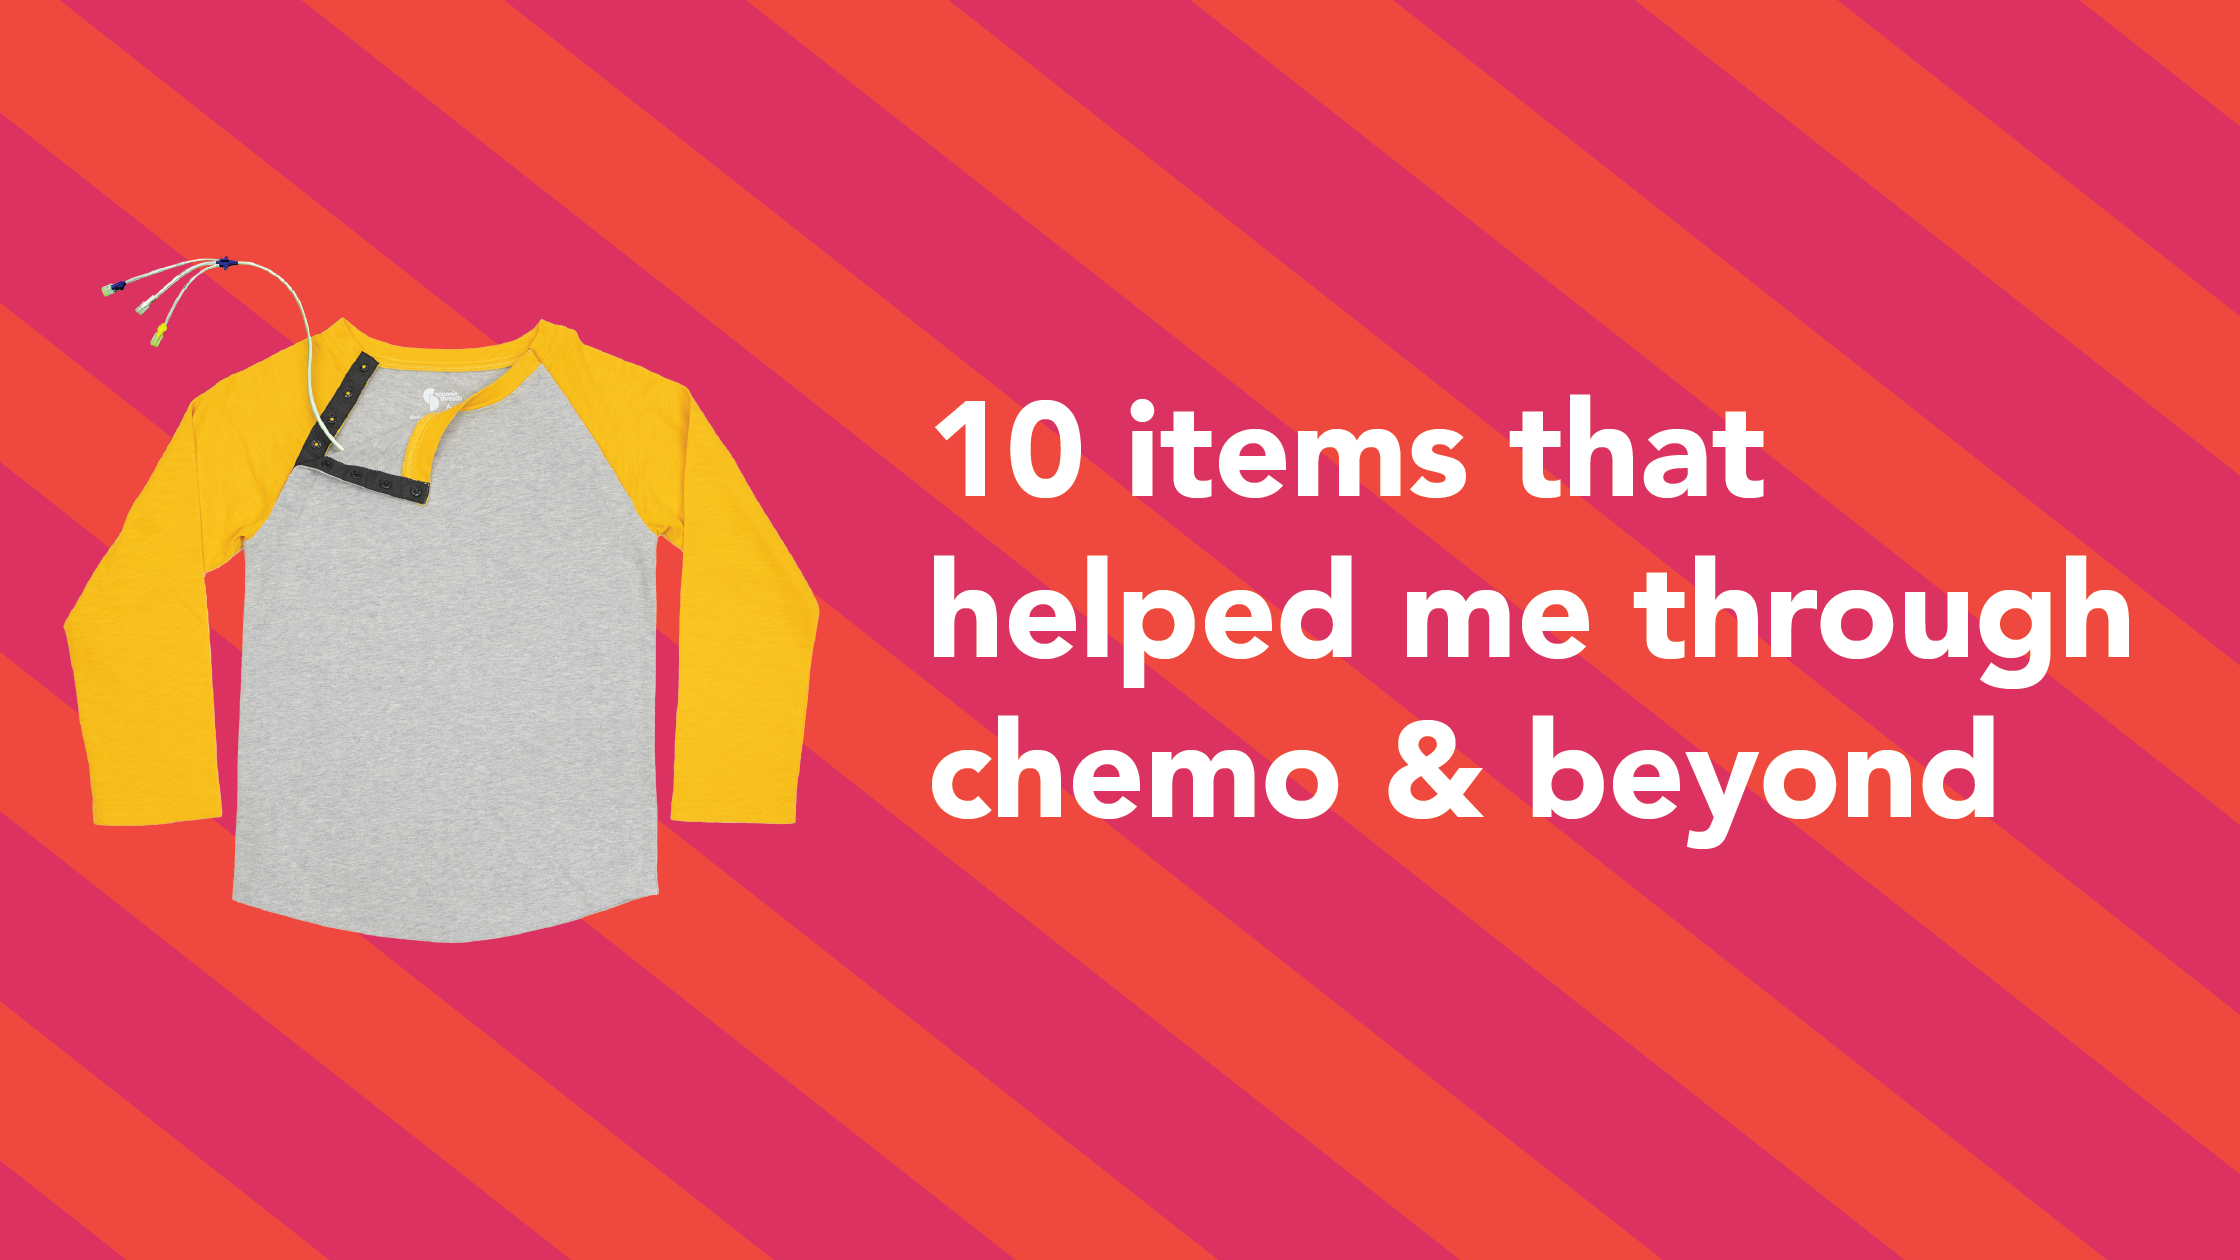 10 Items That Helped Me Through Chemo & Beyond